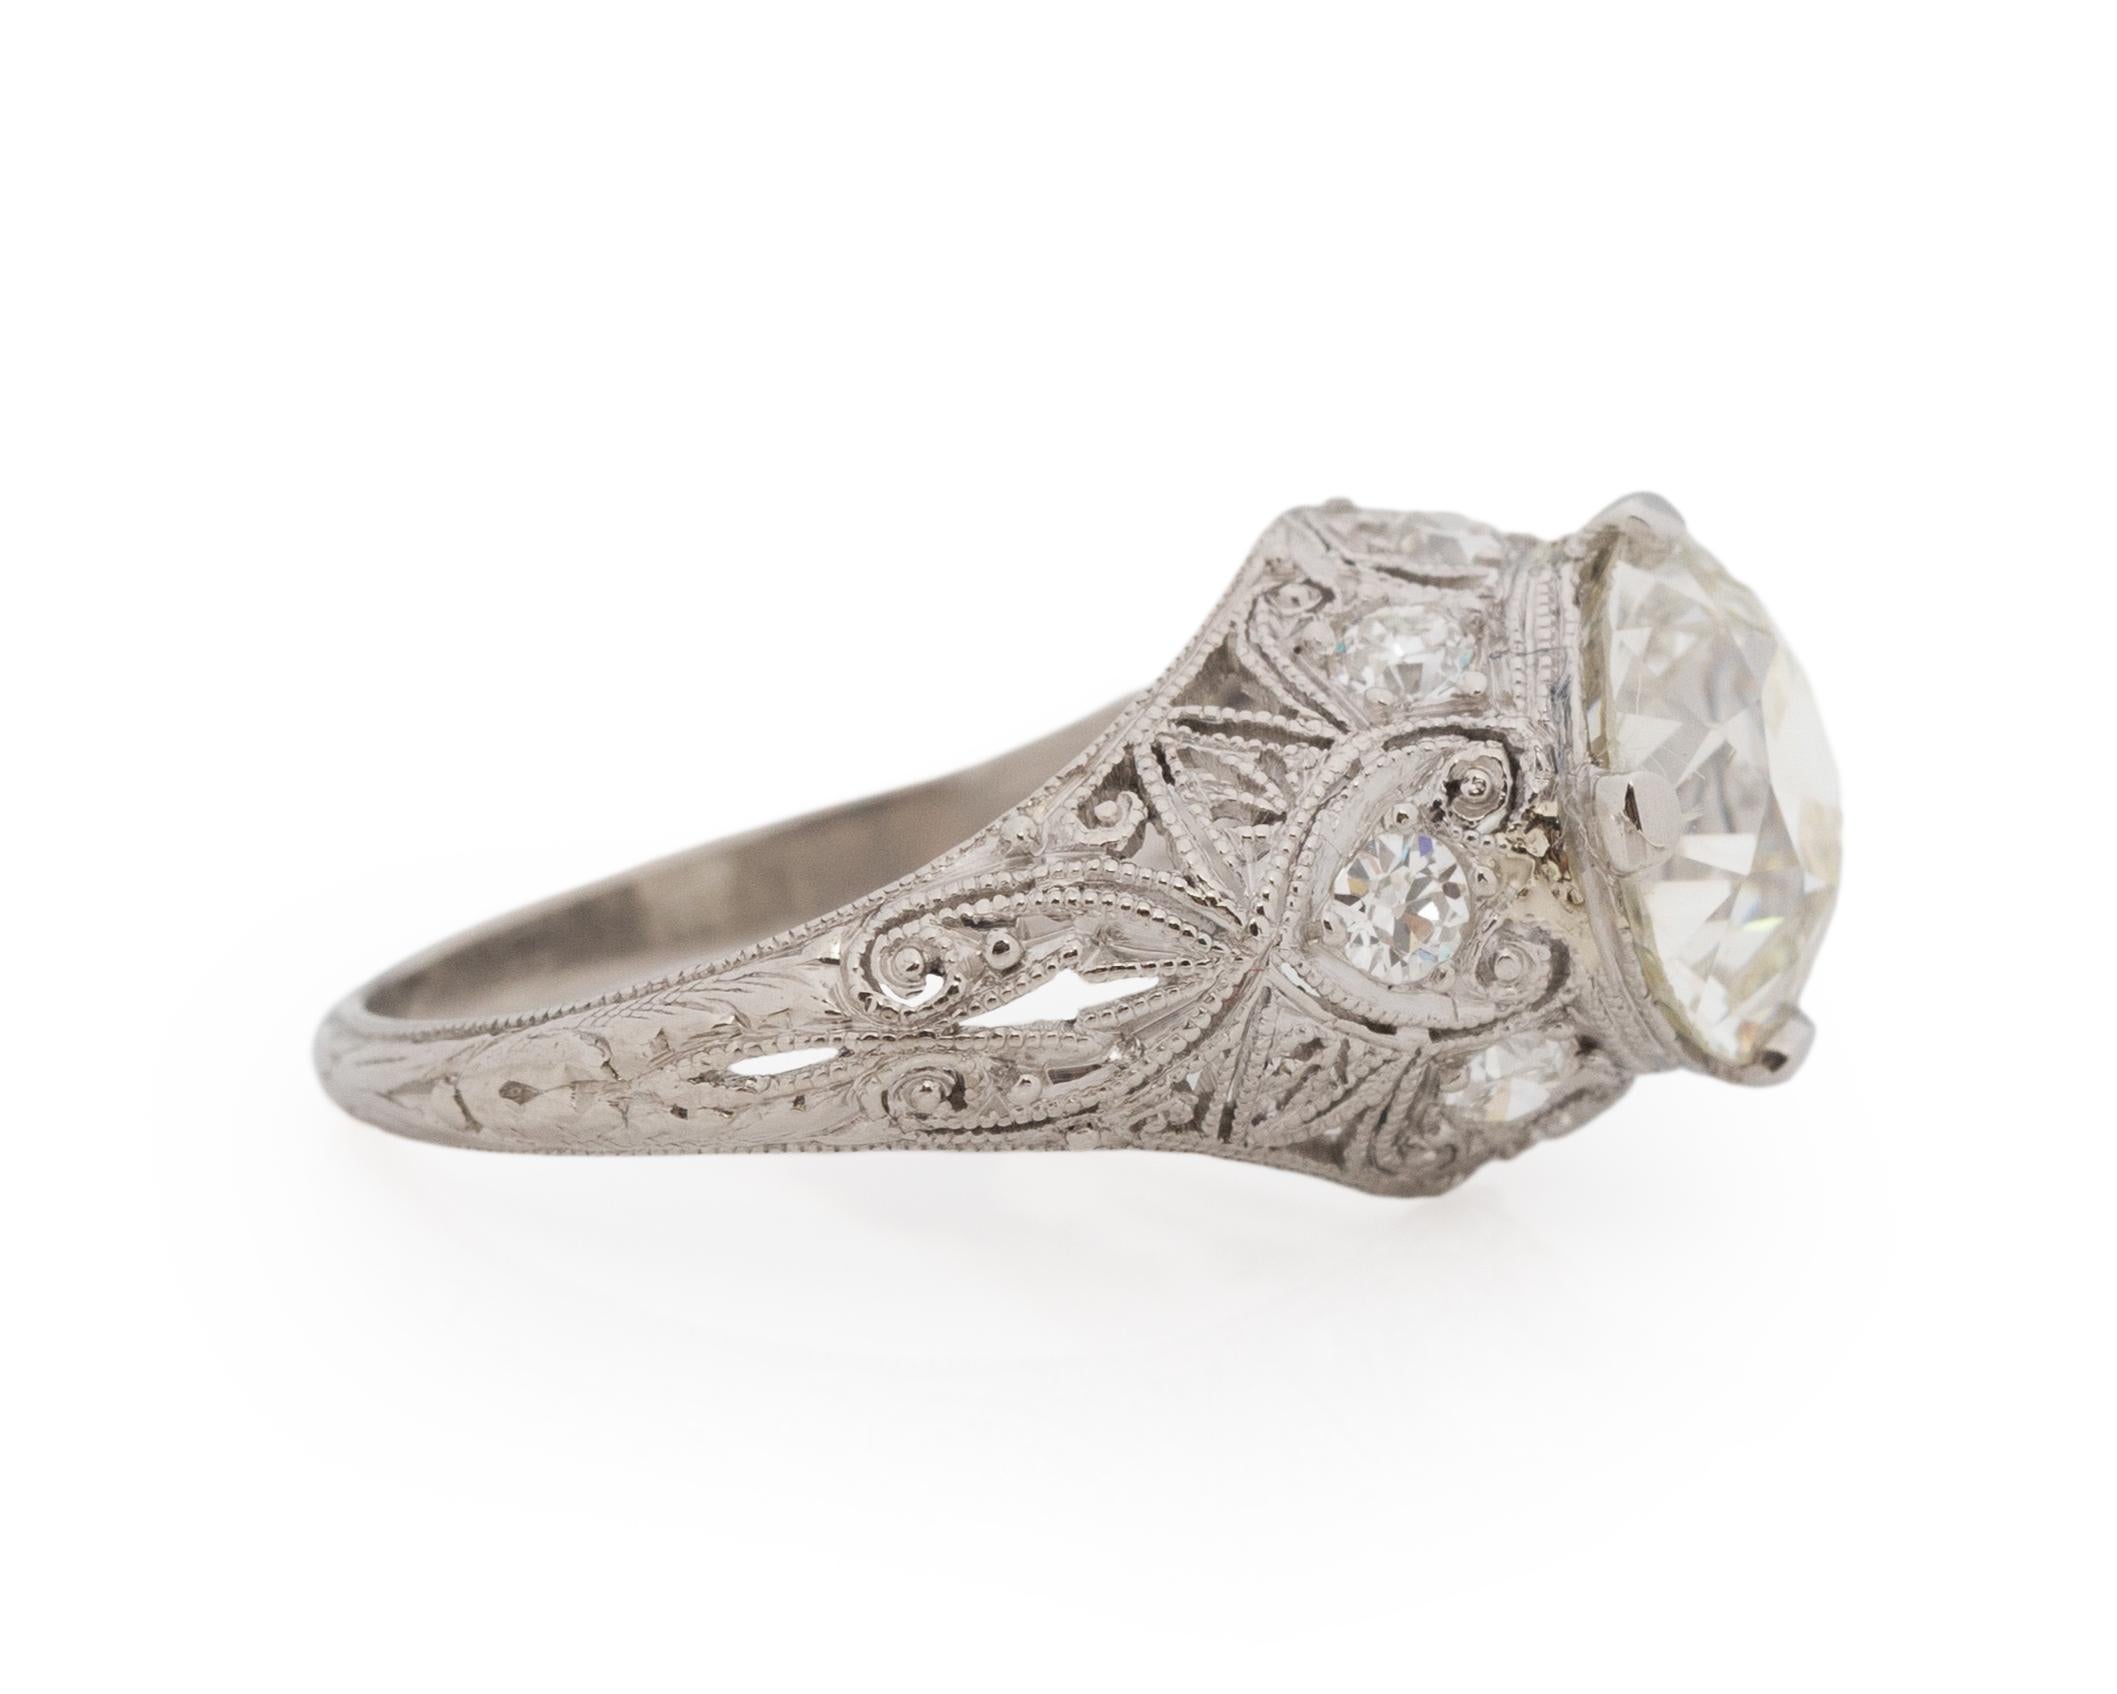 Ring Size: 4.75
Metal Type: Platinum [Hallmarked, and Tested]
Weight: 3.0 grams

Center Diamond Details:
GIA REPORT #:5222191895
Weight: 2.26ct
Cut: Old European brilliant
Color: K
Clarity: I1
Measurements: 8.55mm x 8.32mm x 5.12mm

Side Stone